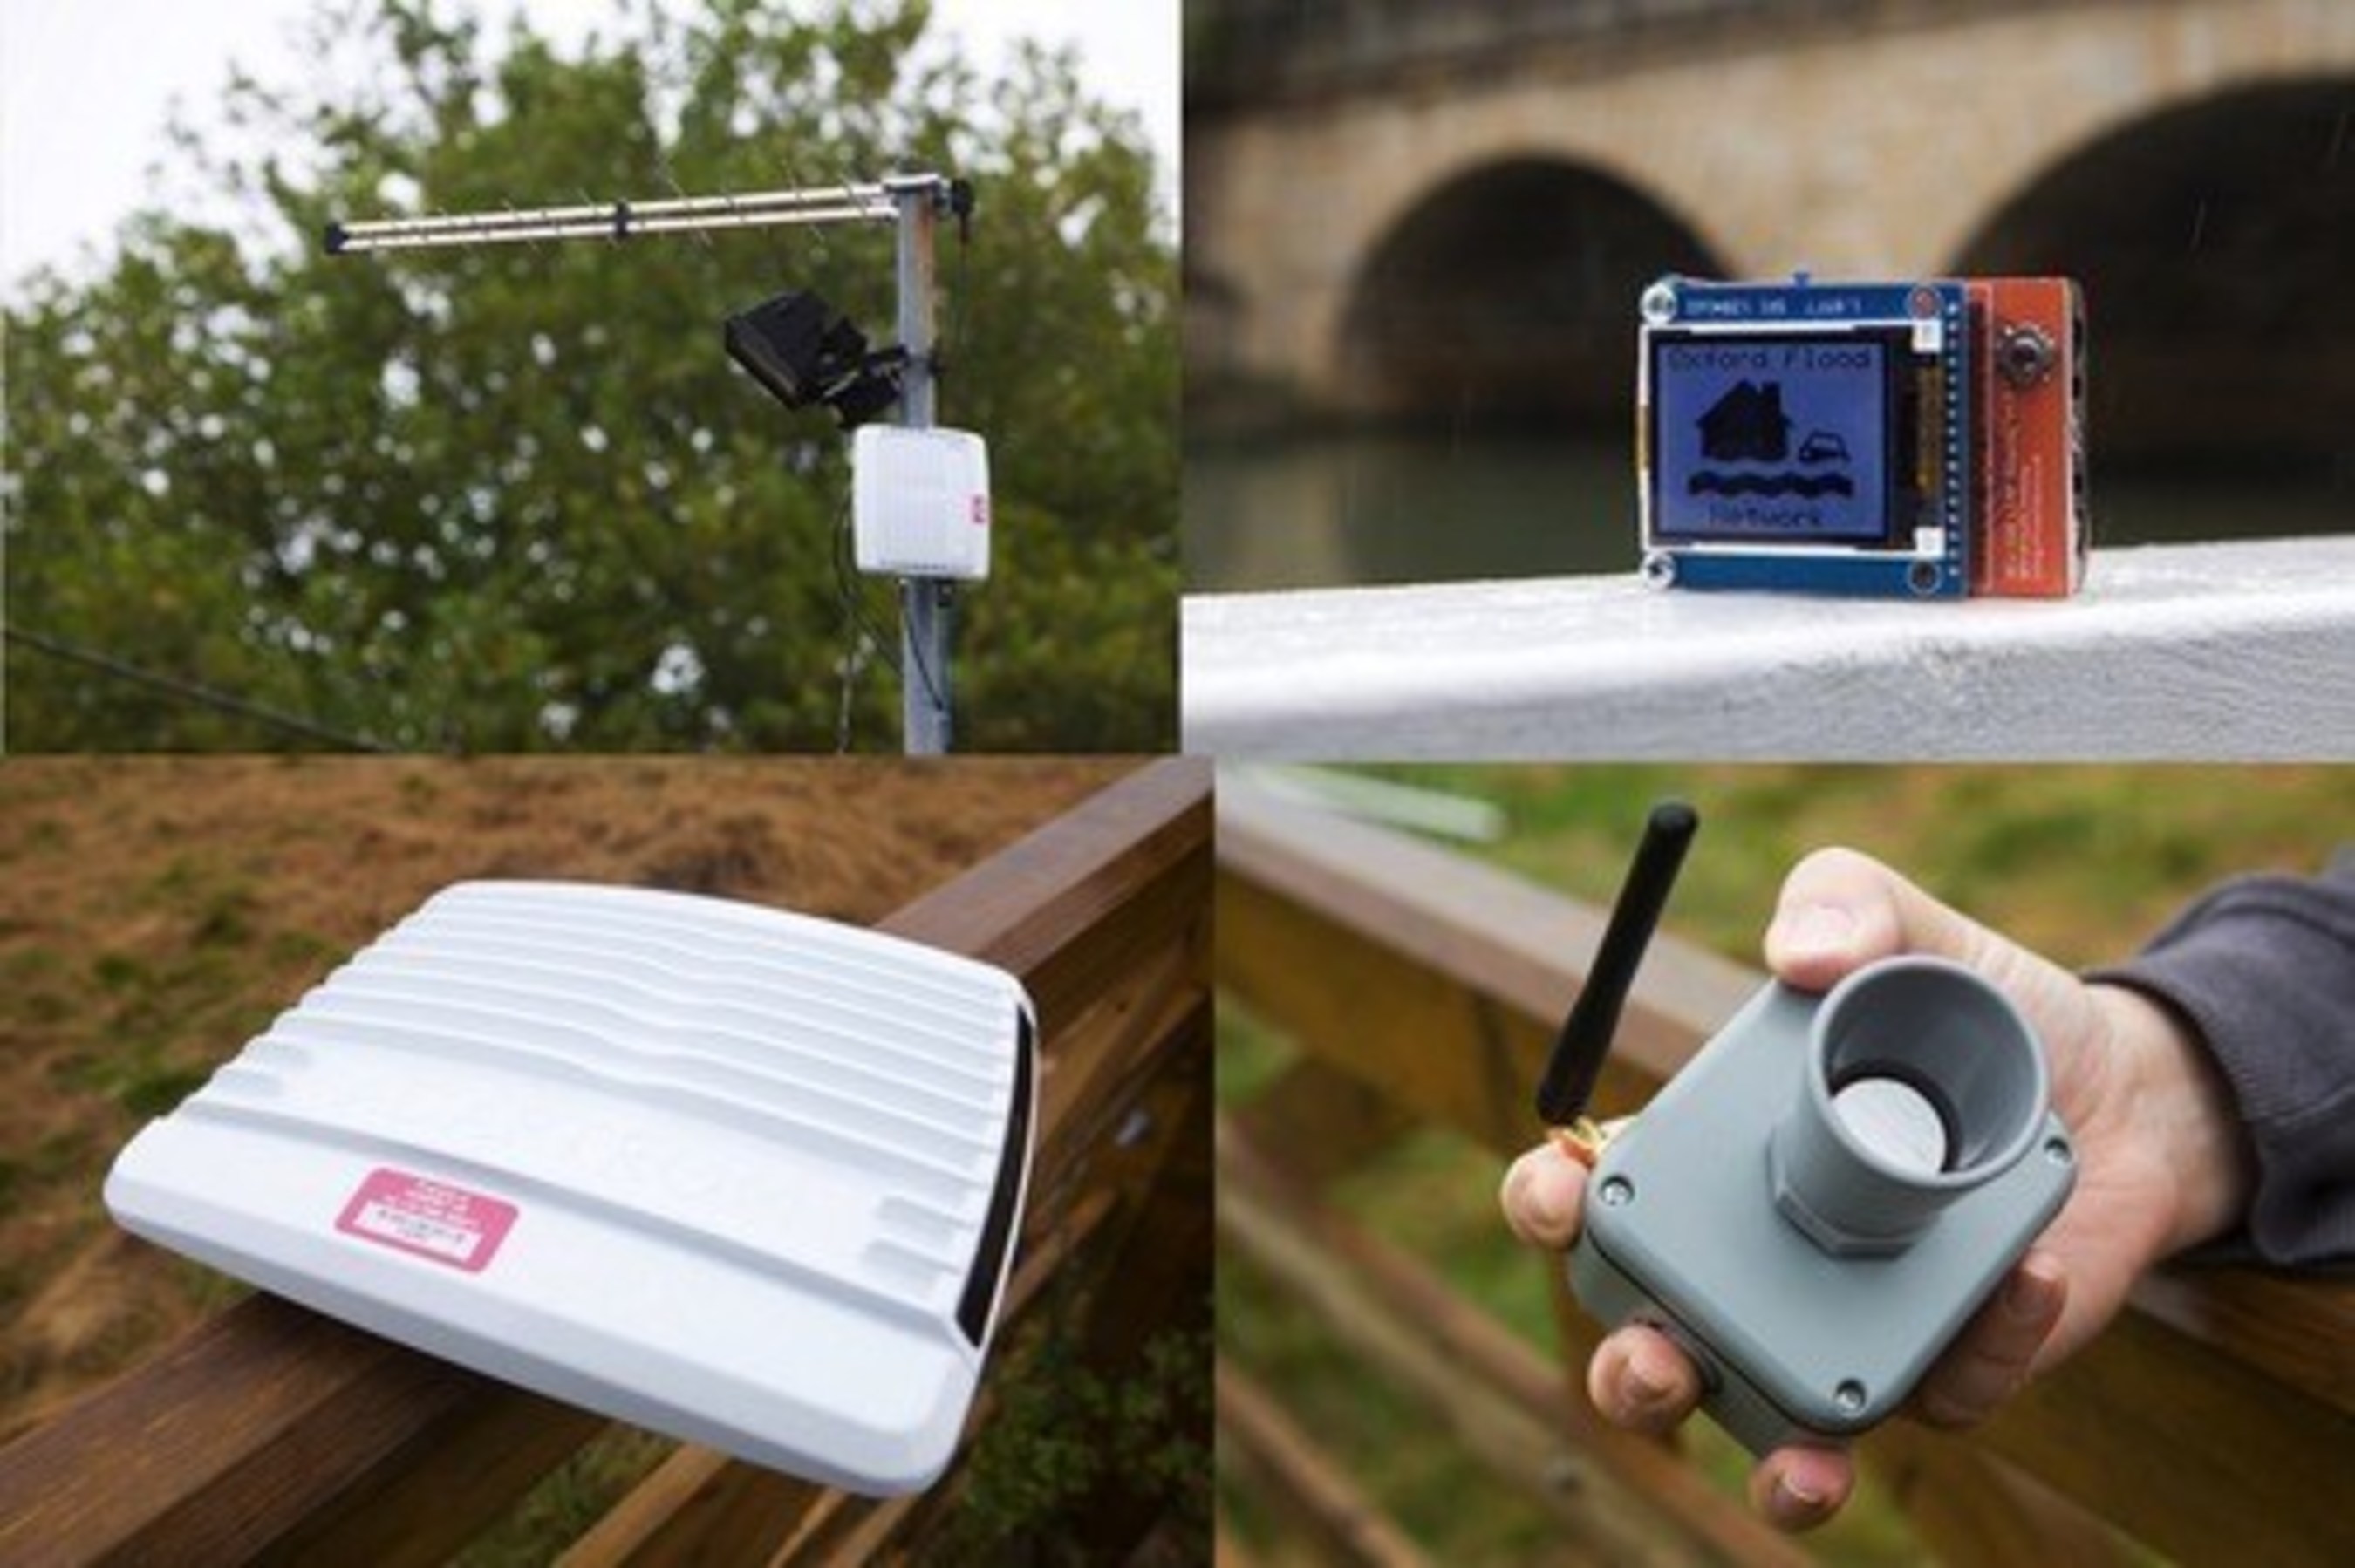 Adaptrum ACRS 2.0 TVWS product used to connect flood monitoring sensors in Oxford, UK.